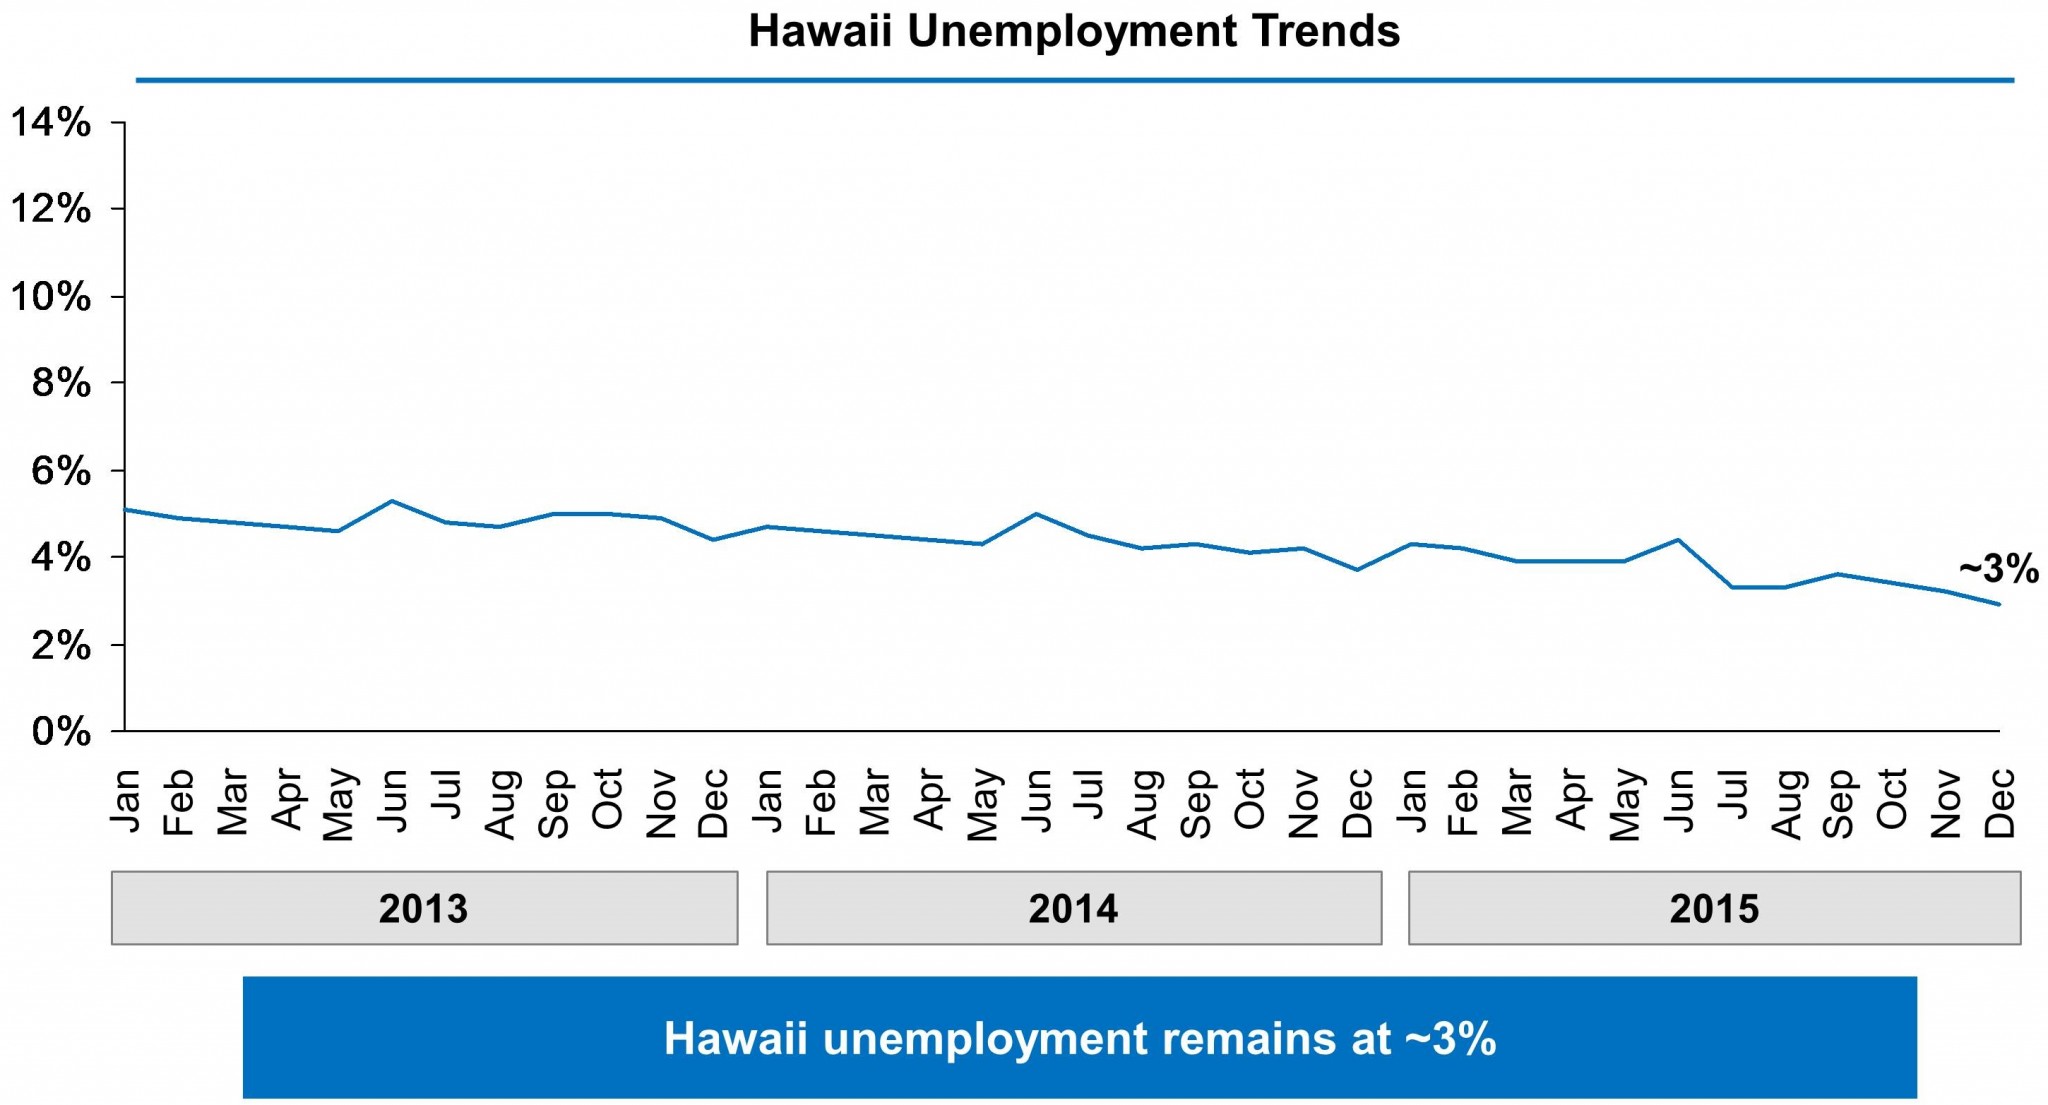 Chart showing Hawaii’s unemployment rate falling from 5% in January 2013 to approximately 3% in December 2015.